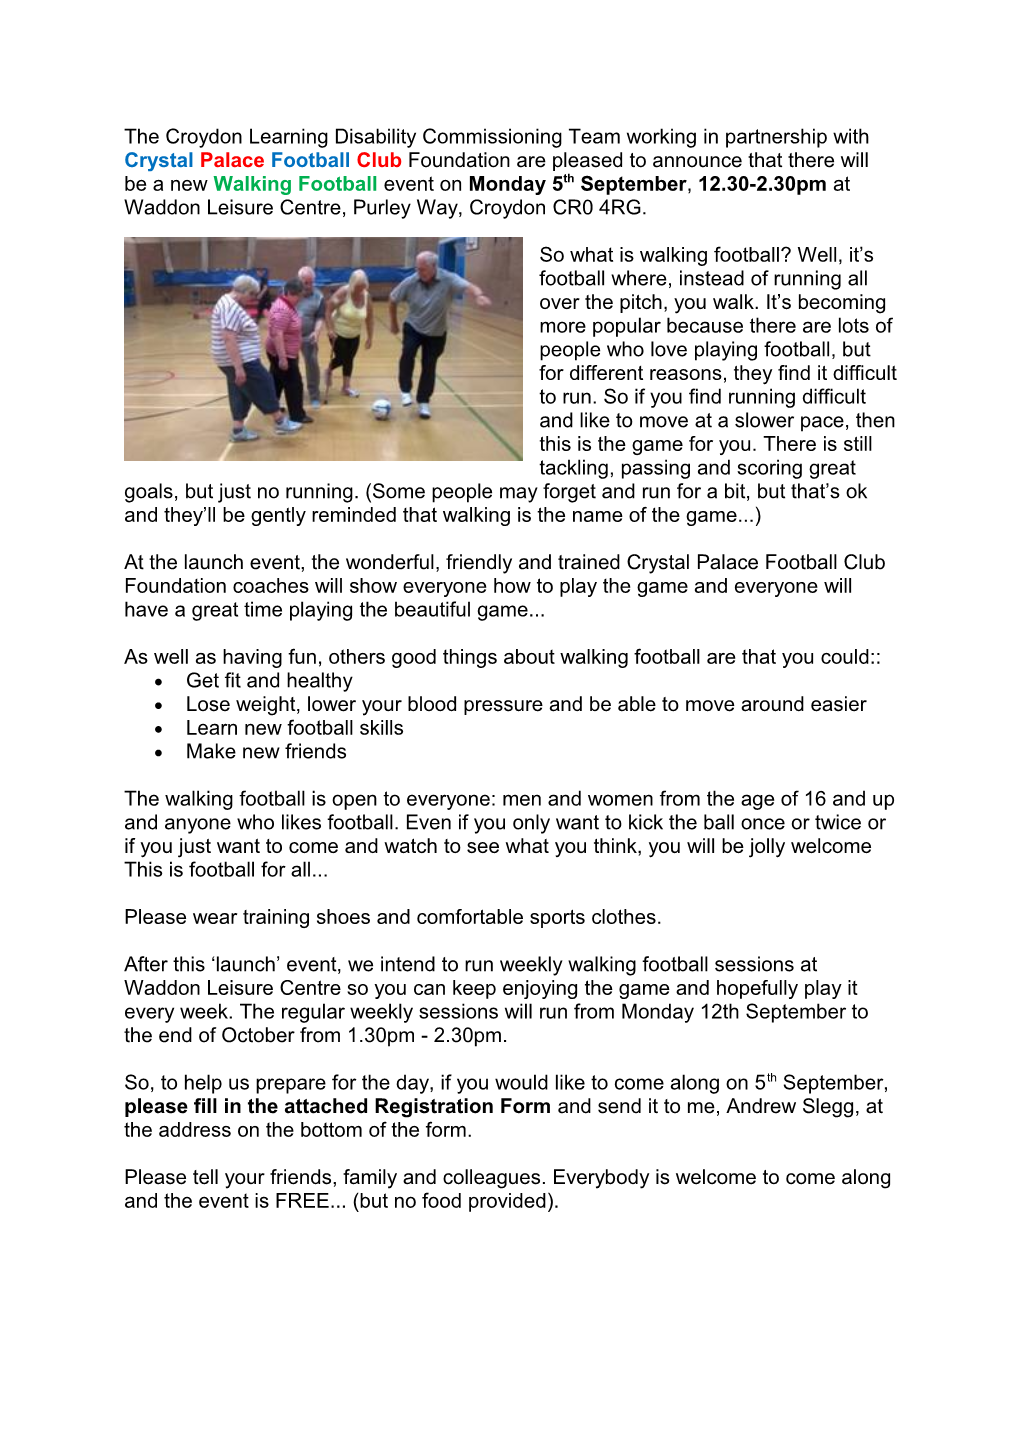 As Well As Having Fun, Others Good Things About Walking Football Are That You Could